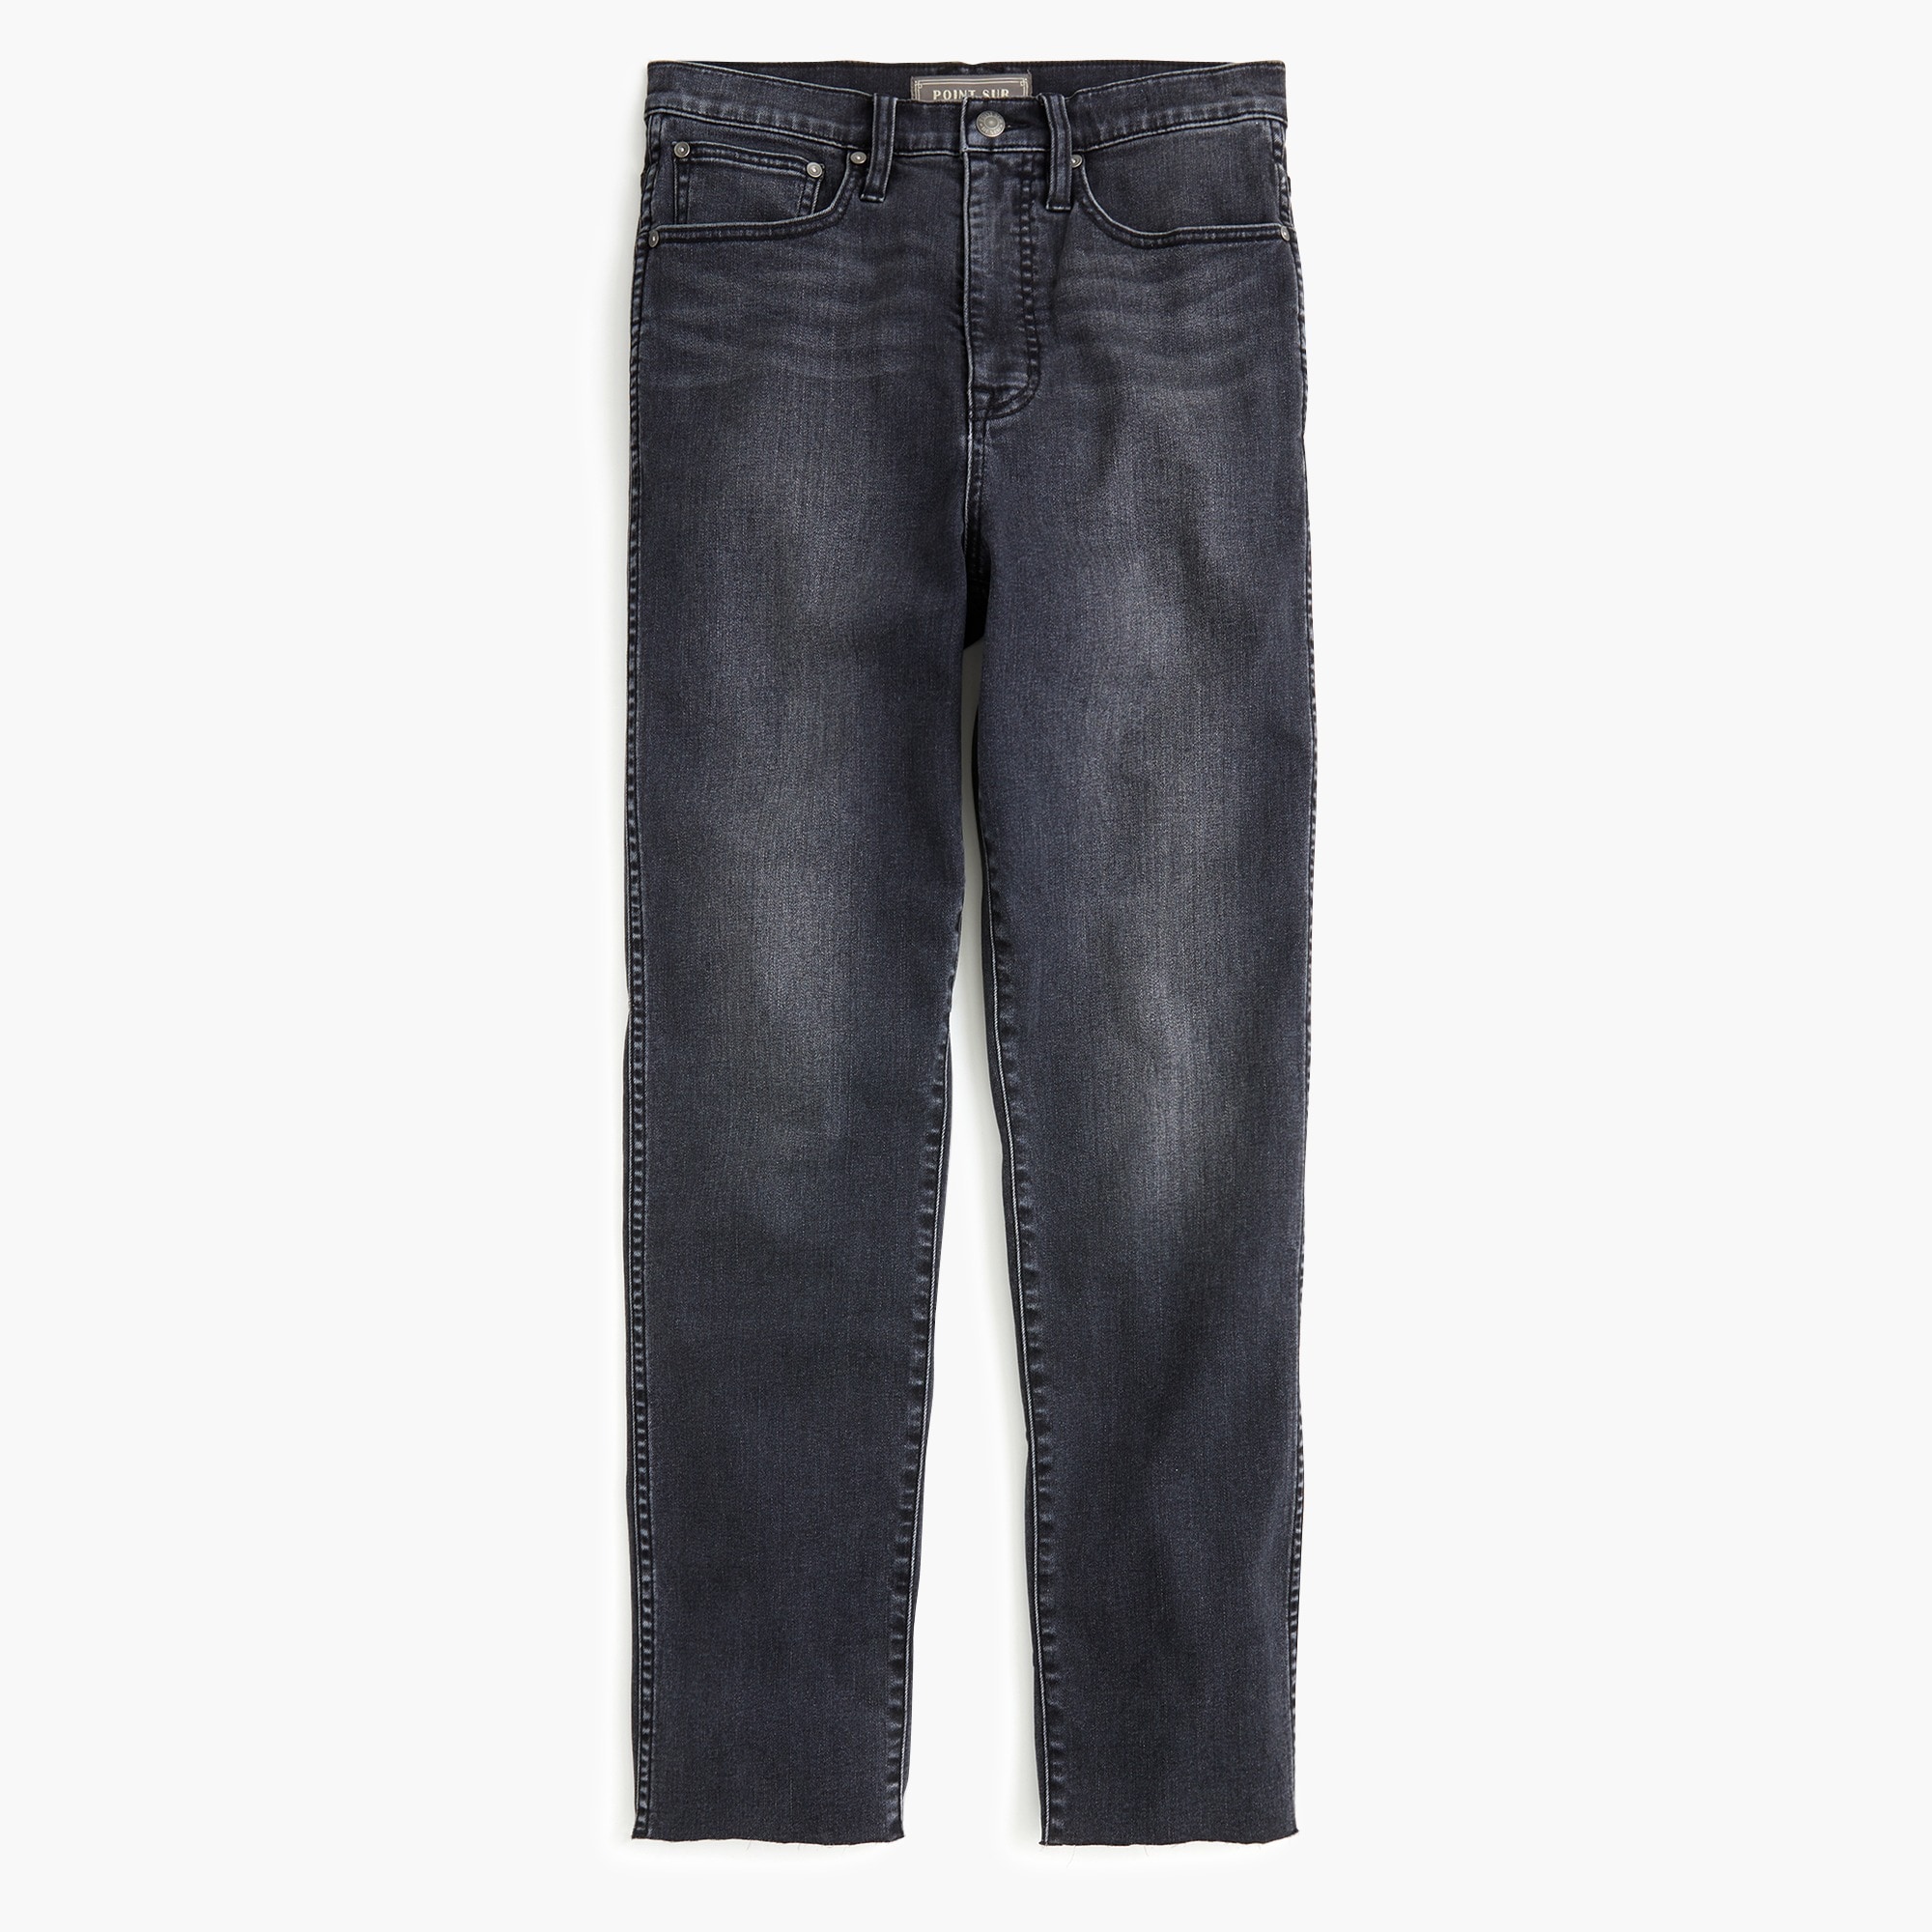 J.Crew: Tall Point Sur Shoreditch Straight Jean In Charcoal Wash